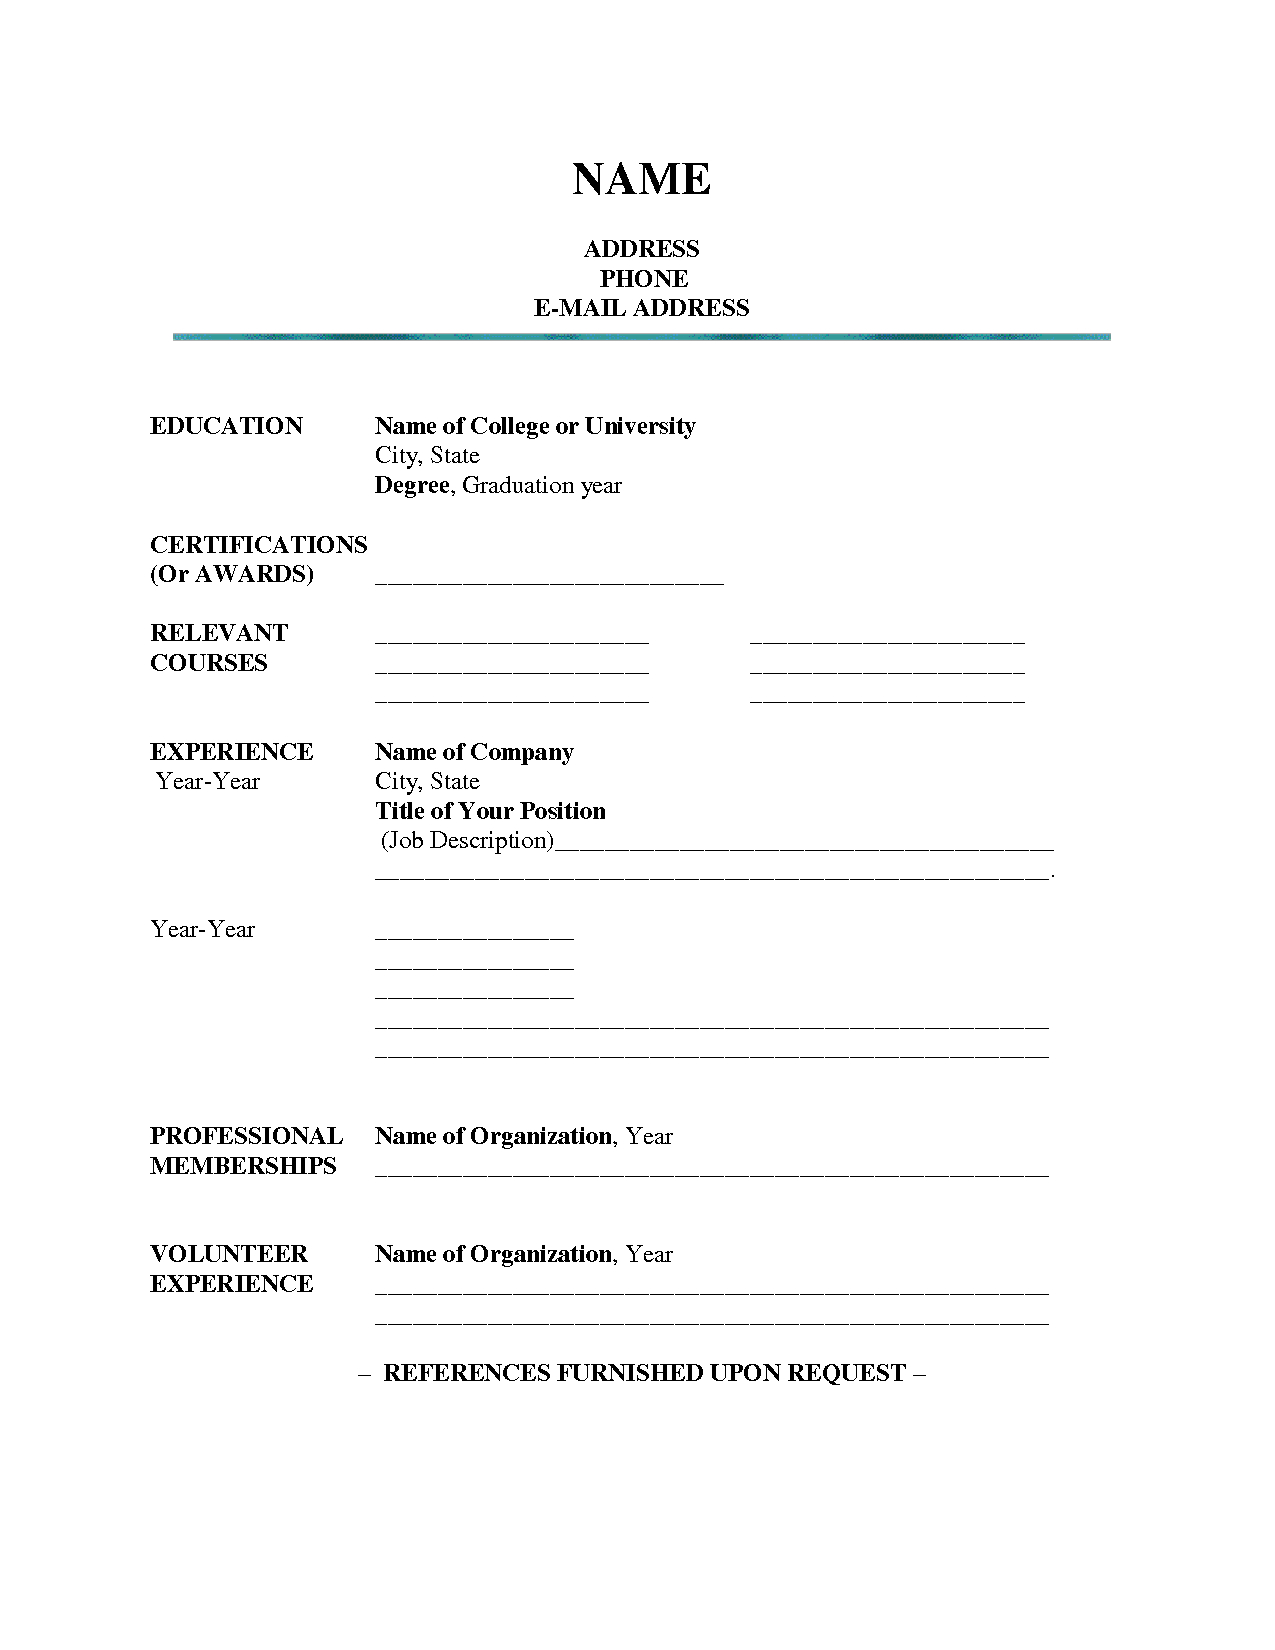 Blank Resume Templates For Microsoft Word – Calep.midnightpig.co Pertaining To Free Blank Resume Templates For Microsoft Word